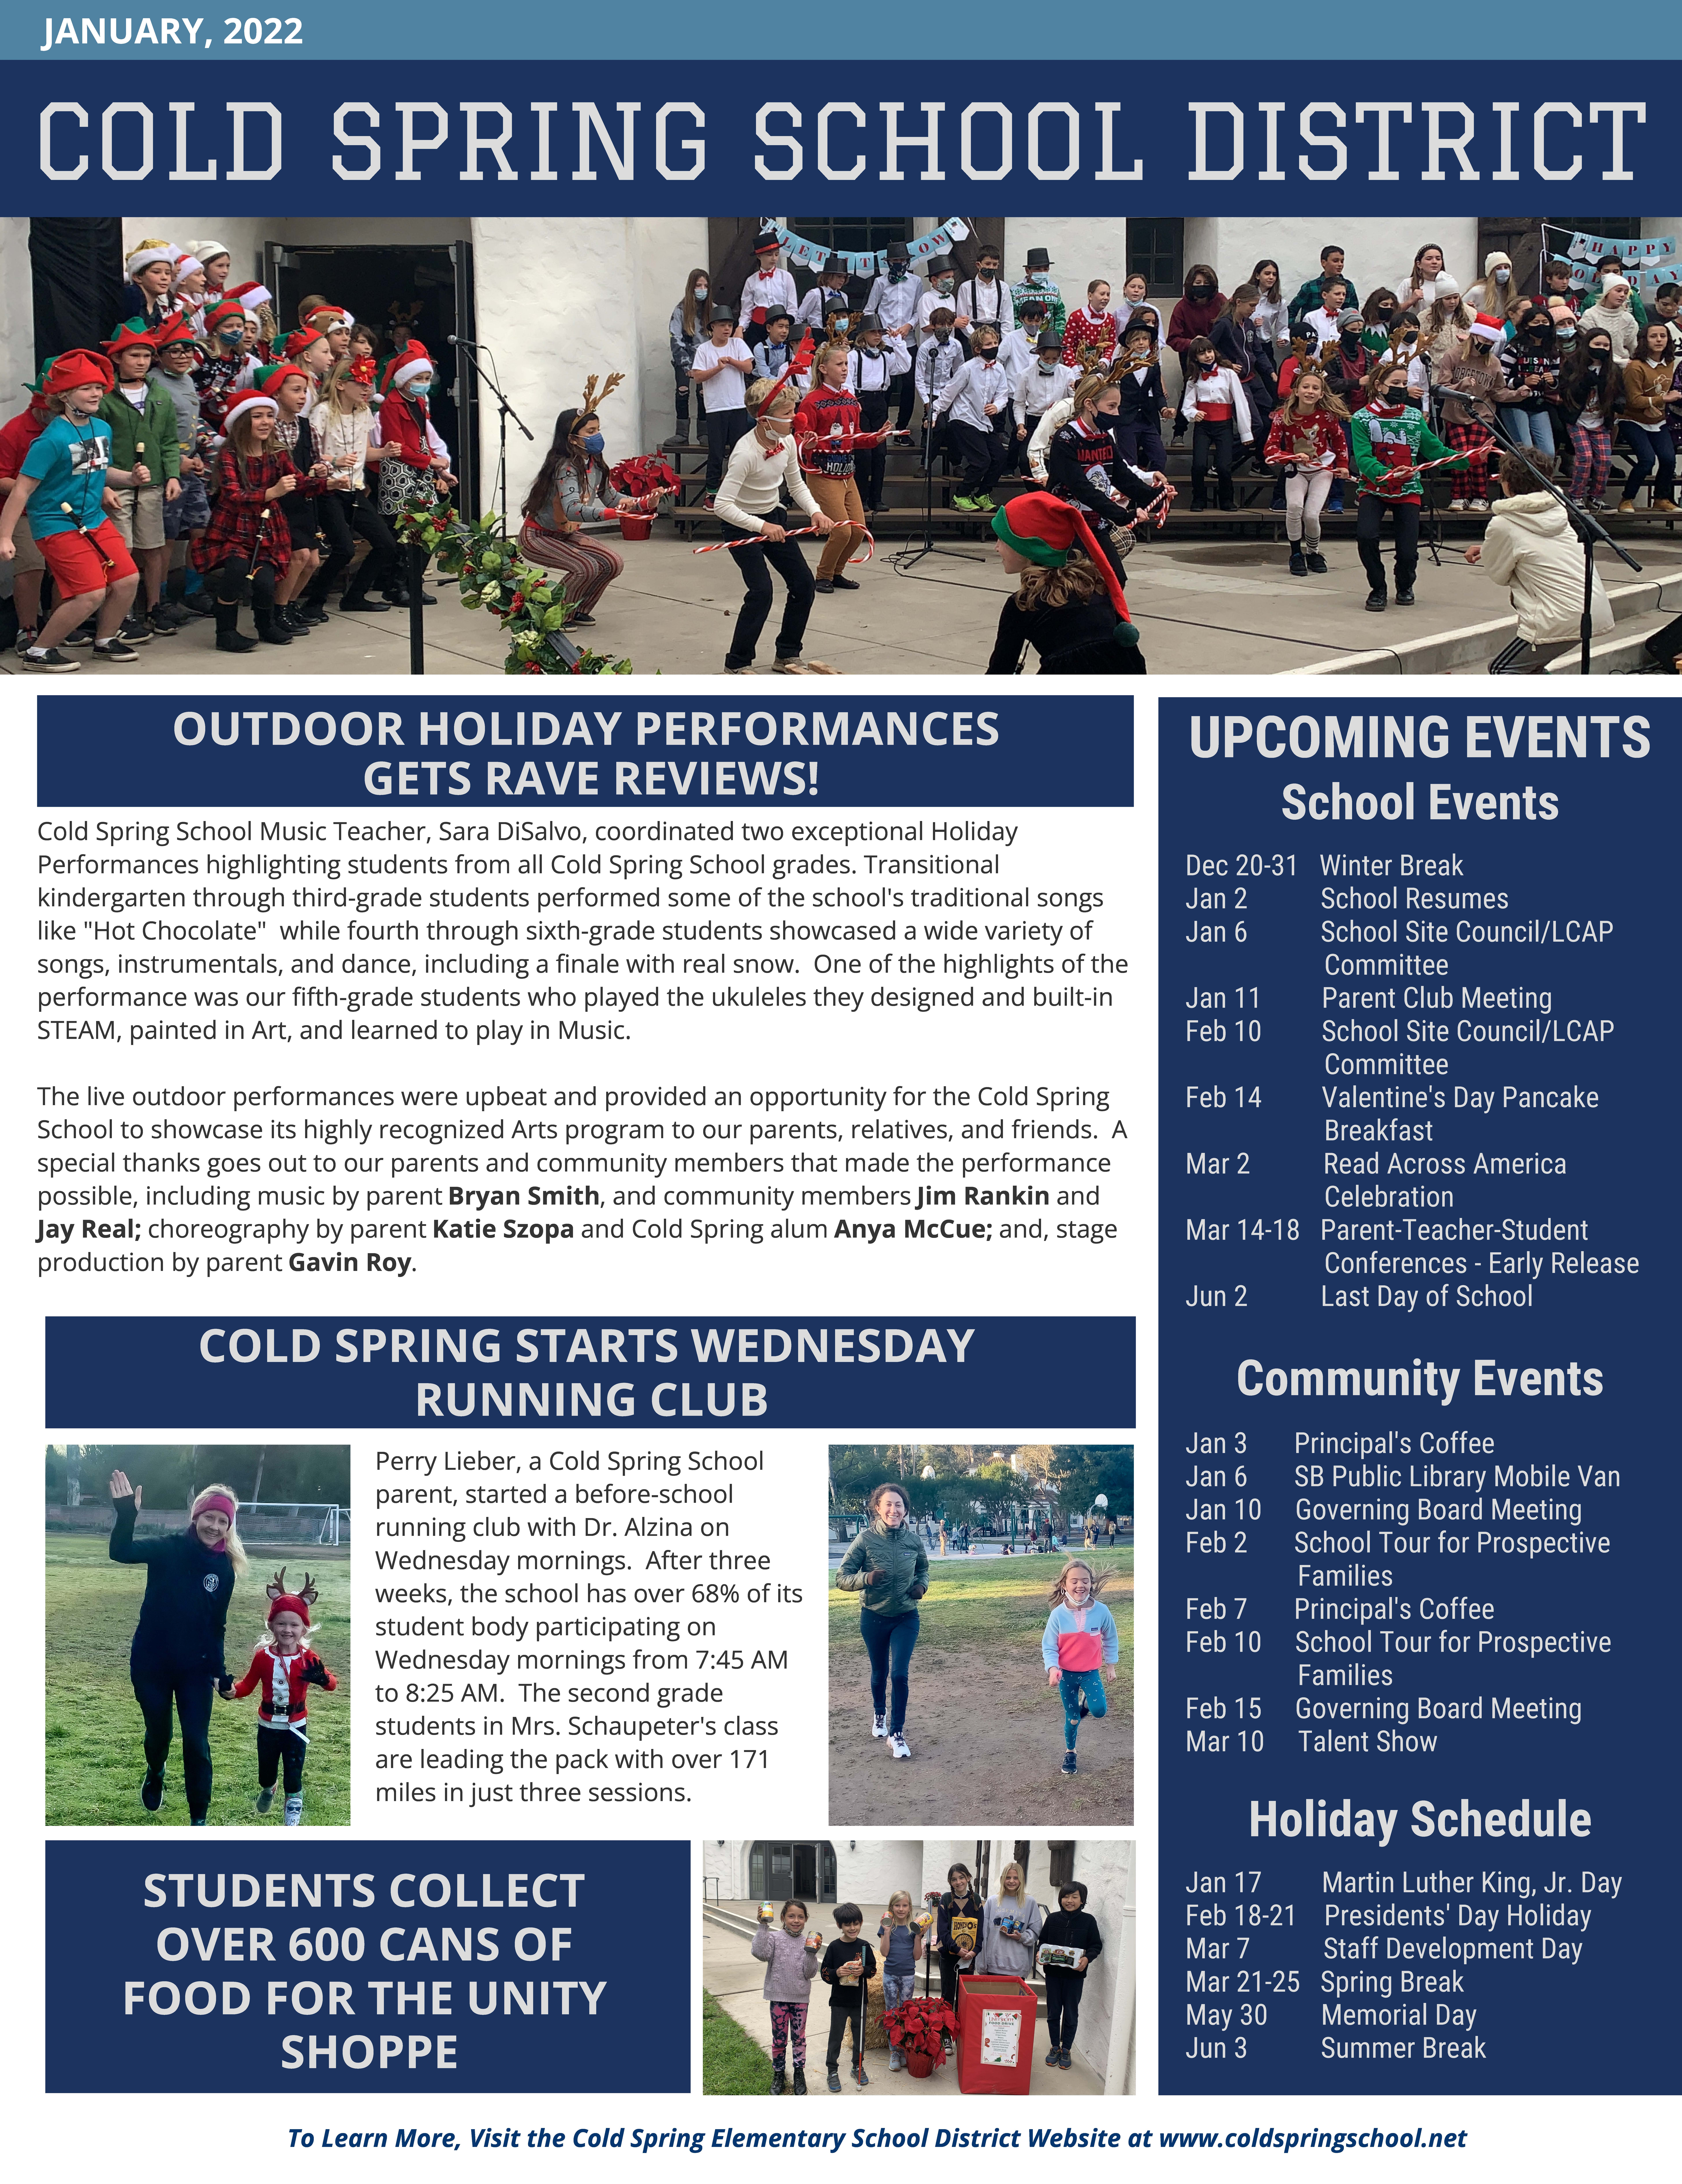 community newsletter with images of winter sing